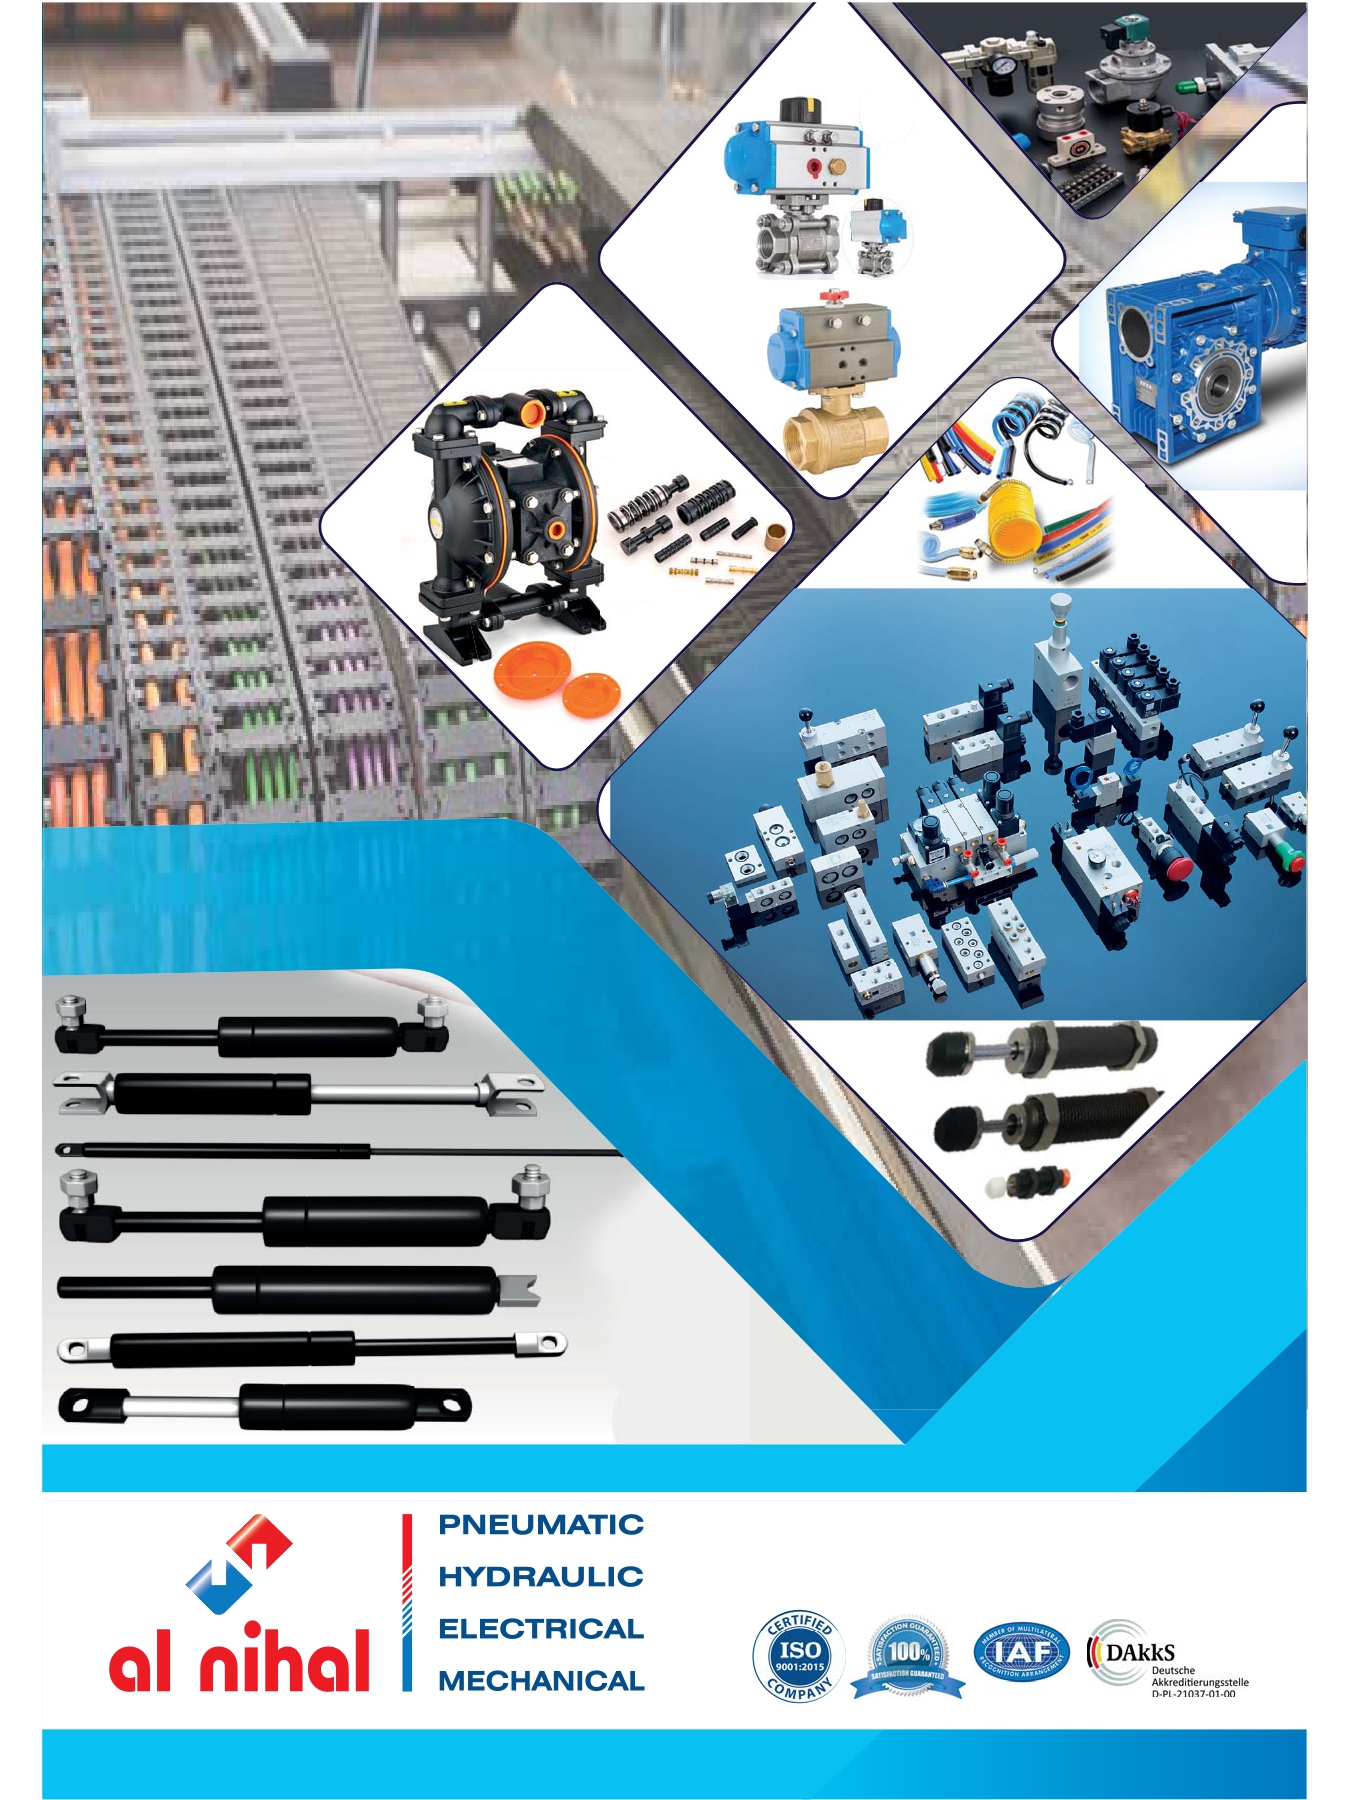 Pneumatic, Electrical, Mechanical,plumbing and Hydraulic equipments in switchgear applications, Industrial Automation Applications,